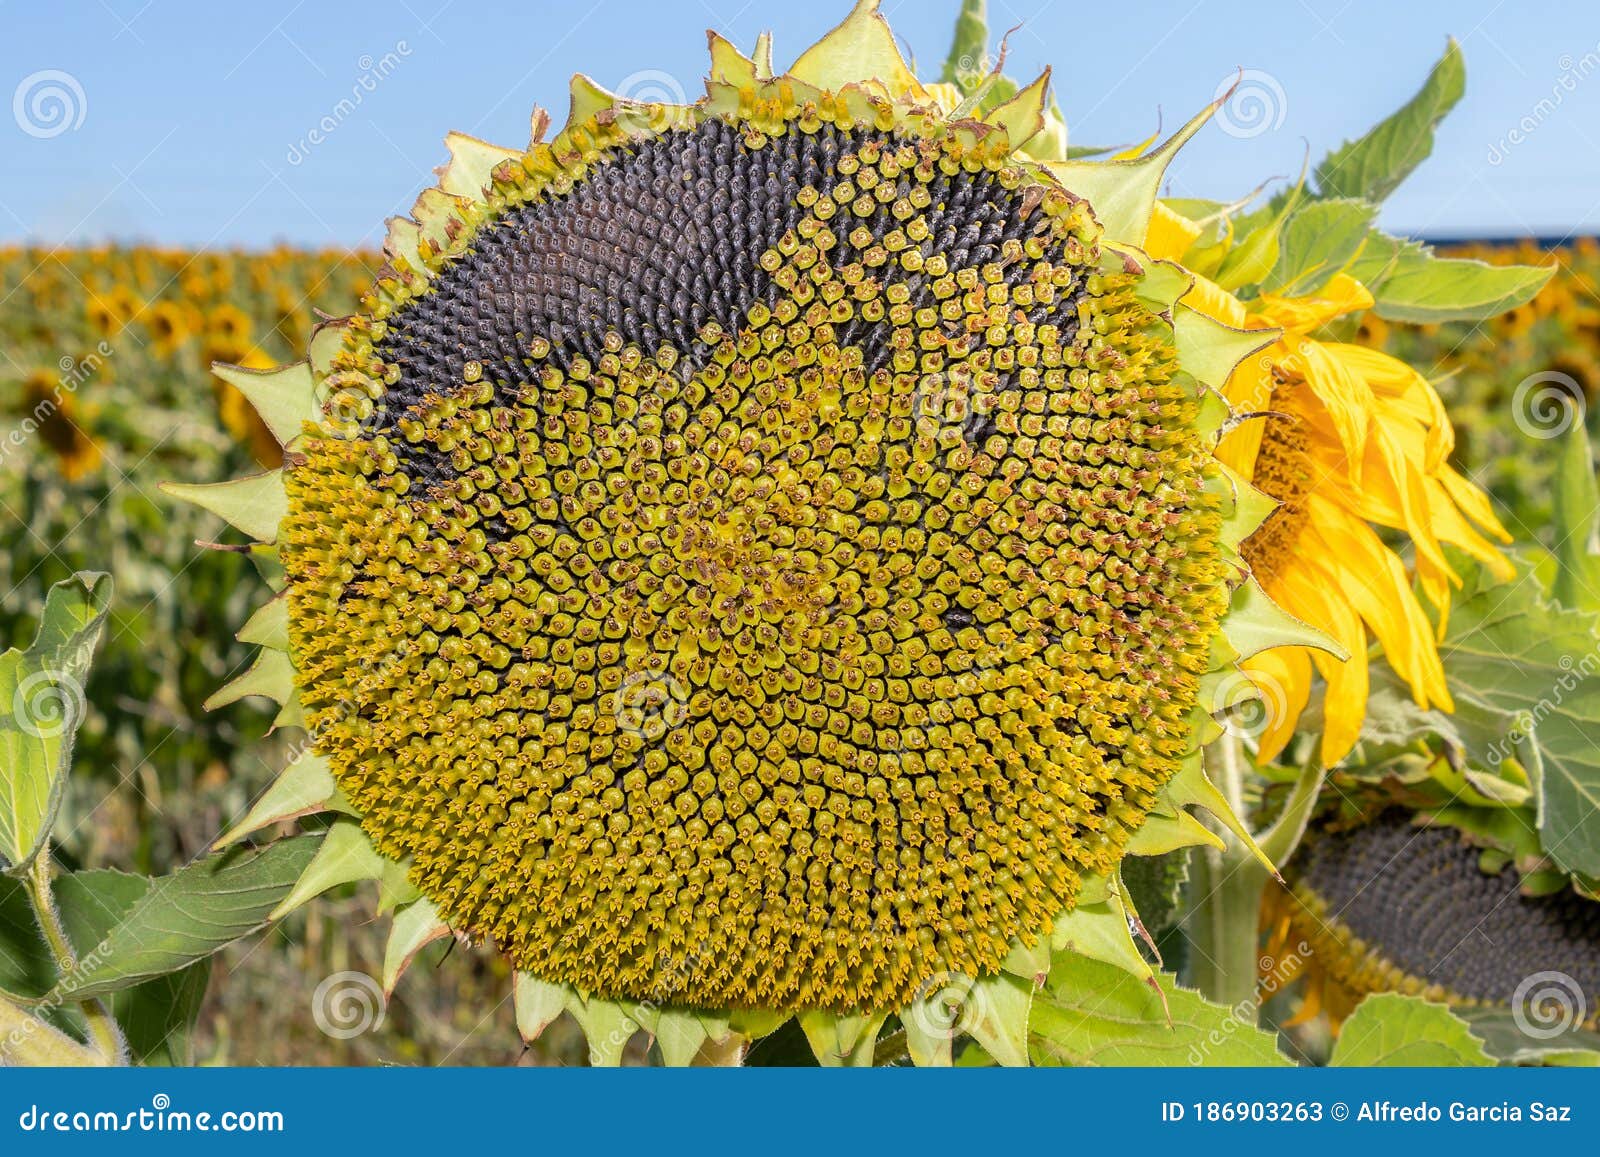 Detail of Seeds in Wilted Sunflower Stock Image - Image of decorative ...